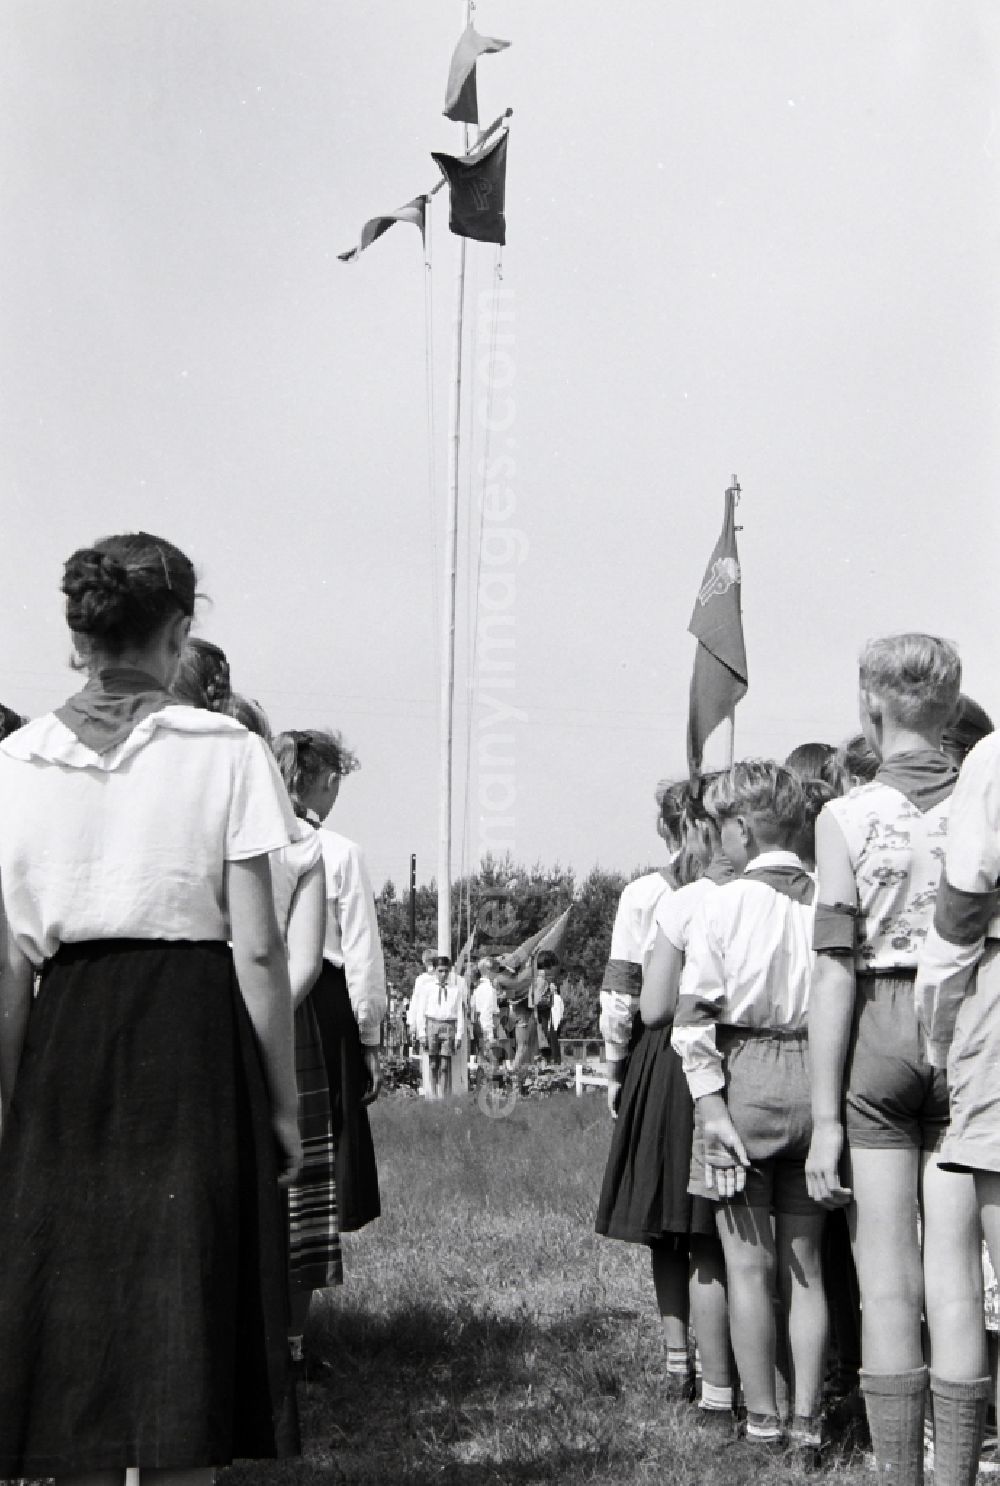 GDR image archive: Prerow - Summer camp operation with pupils and teenagers in the summer camp Kim Ir Sen of the pioneer organization Ernst Thaelmann in Prerow in the state Mecklenburg-Western Pomerania on the territory of the former GDR, German Democratic Republic. With homemade phantasy uniforms and pre-military drill and ante-exercises, the communist tradition was commemorated in the Spanish Civil War